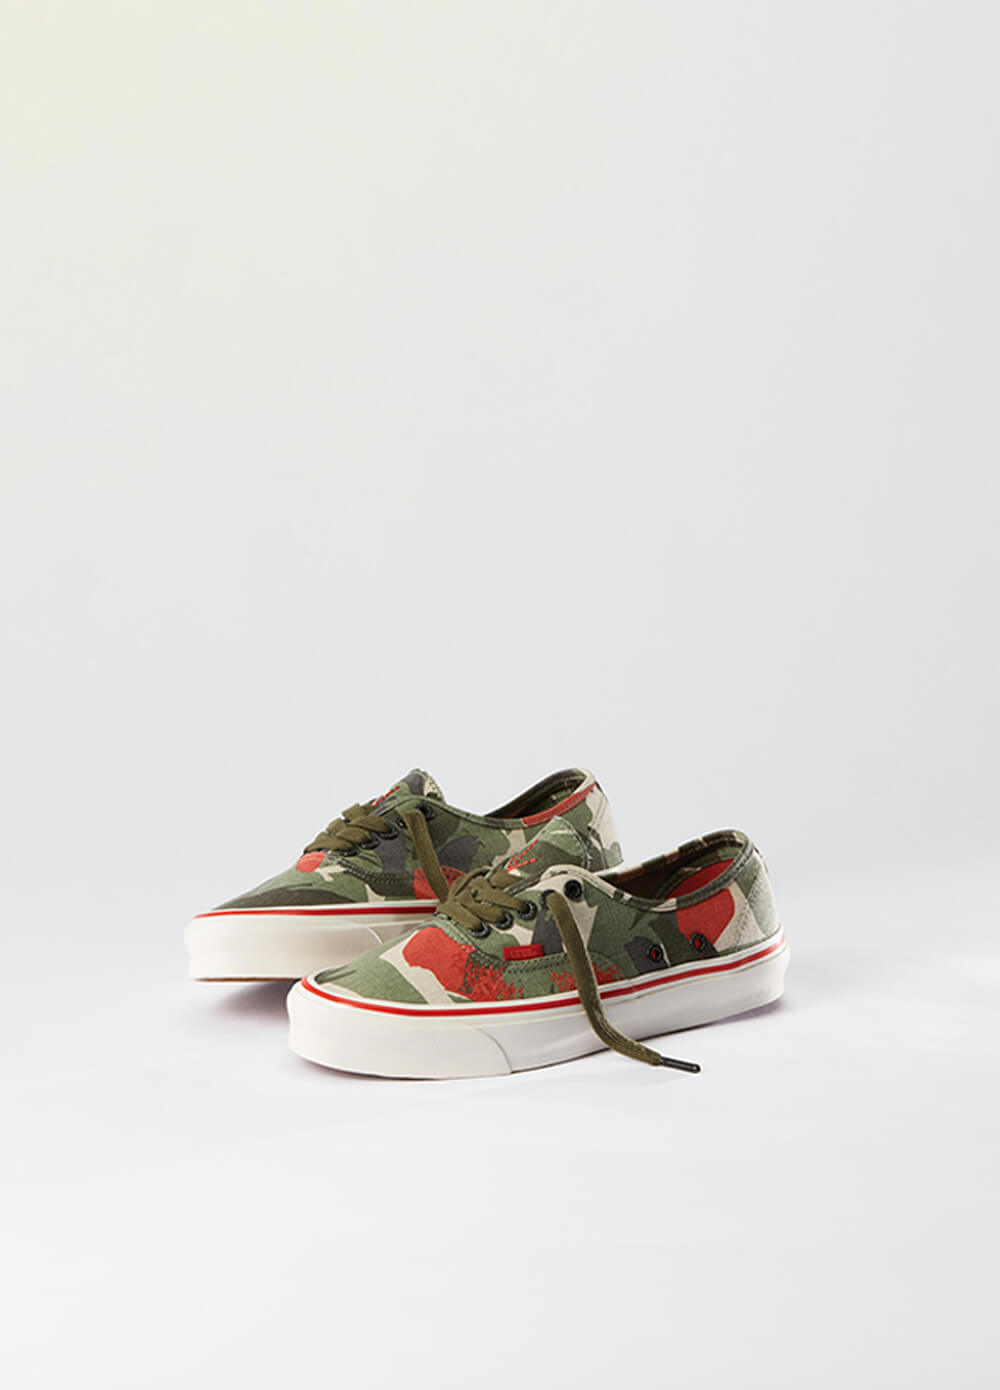 x Nigel Cabourn OG Authentic LX Sneakers